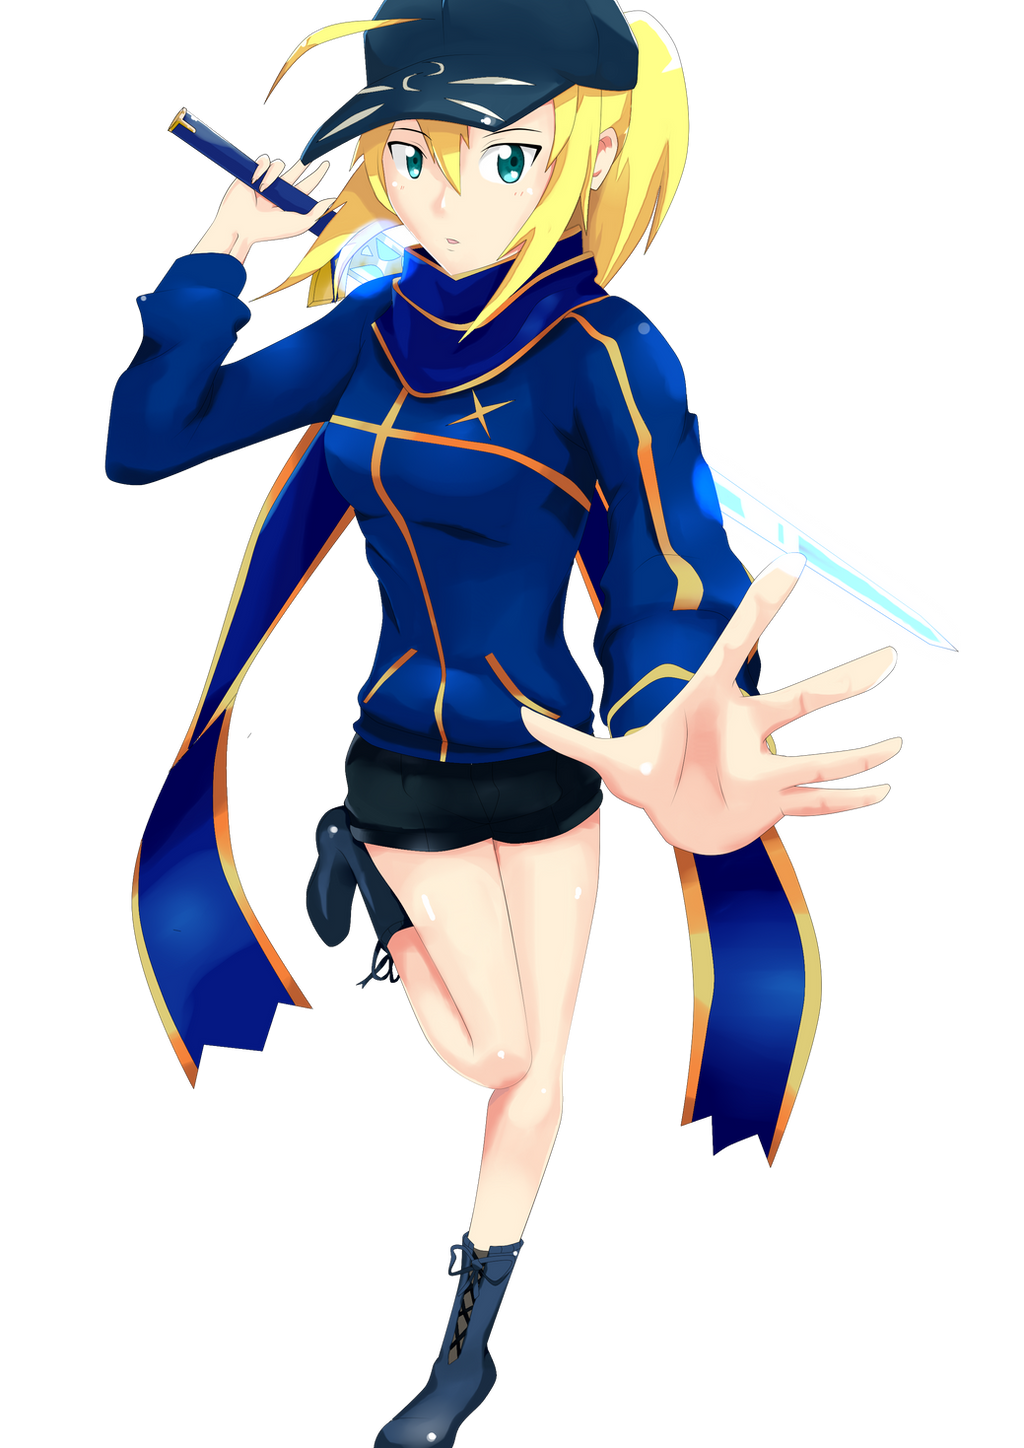 Mysterious Heroine X Backgroundless By Rianez3 On DeviantArt